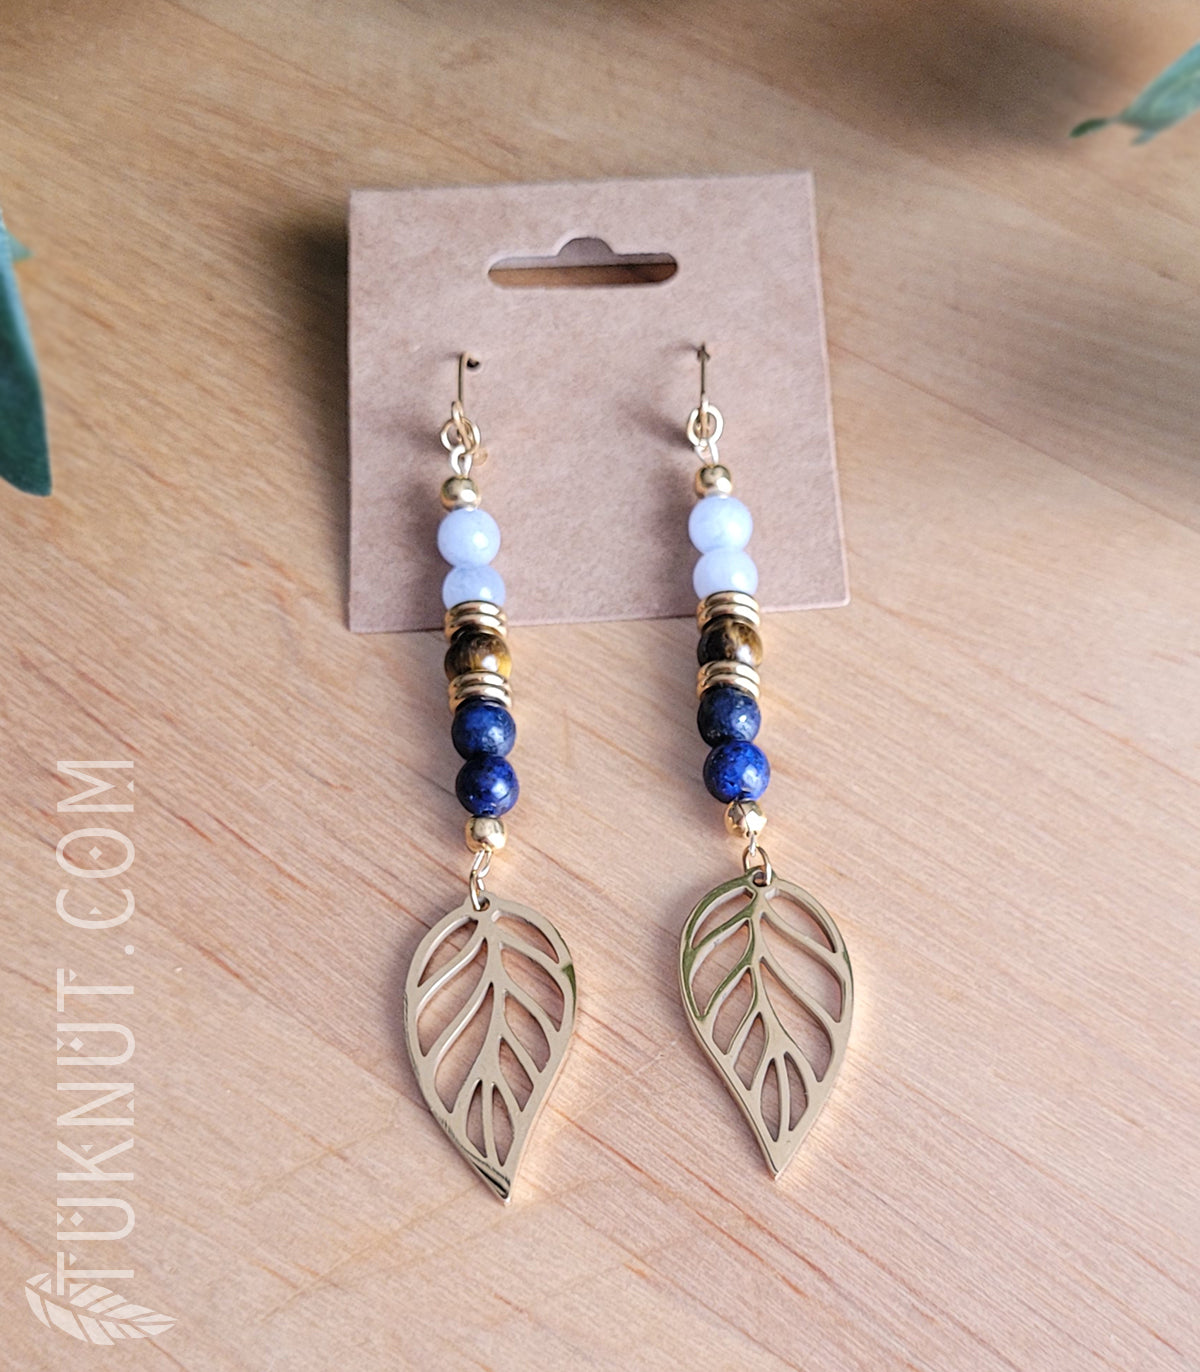 Golden Leaf and Stones Earrings